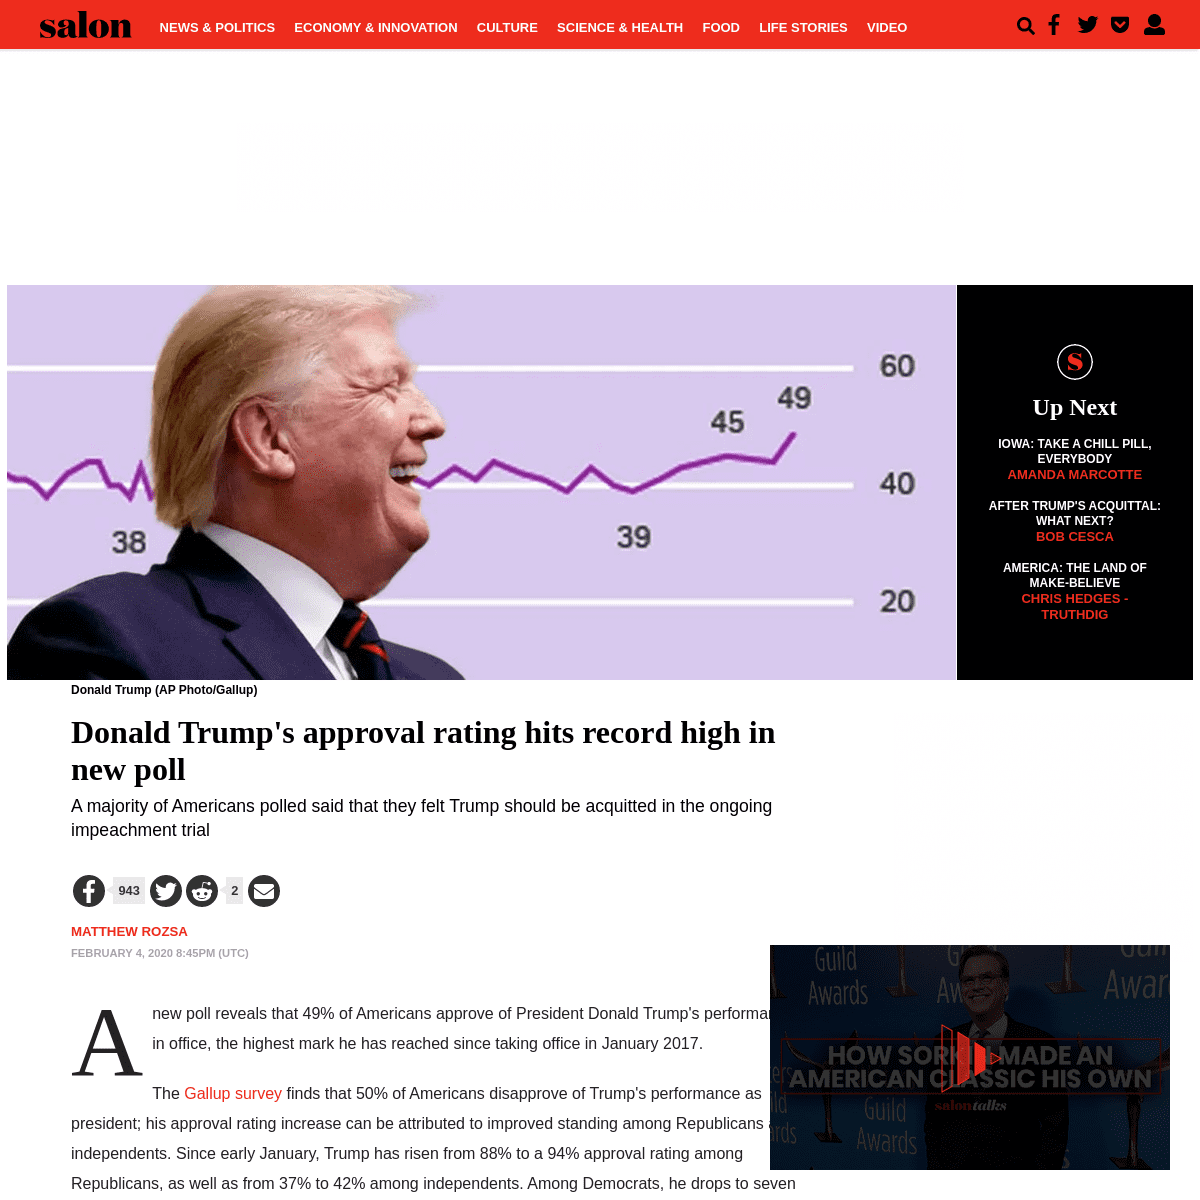 A complete backup of www.salon.com/2020/02/04/donald-trumps-approval-rating-hits-record-high-in-new-poll/